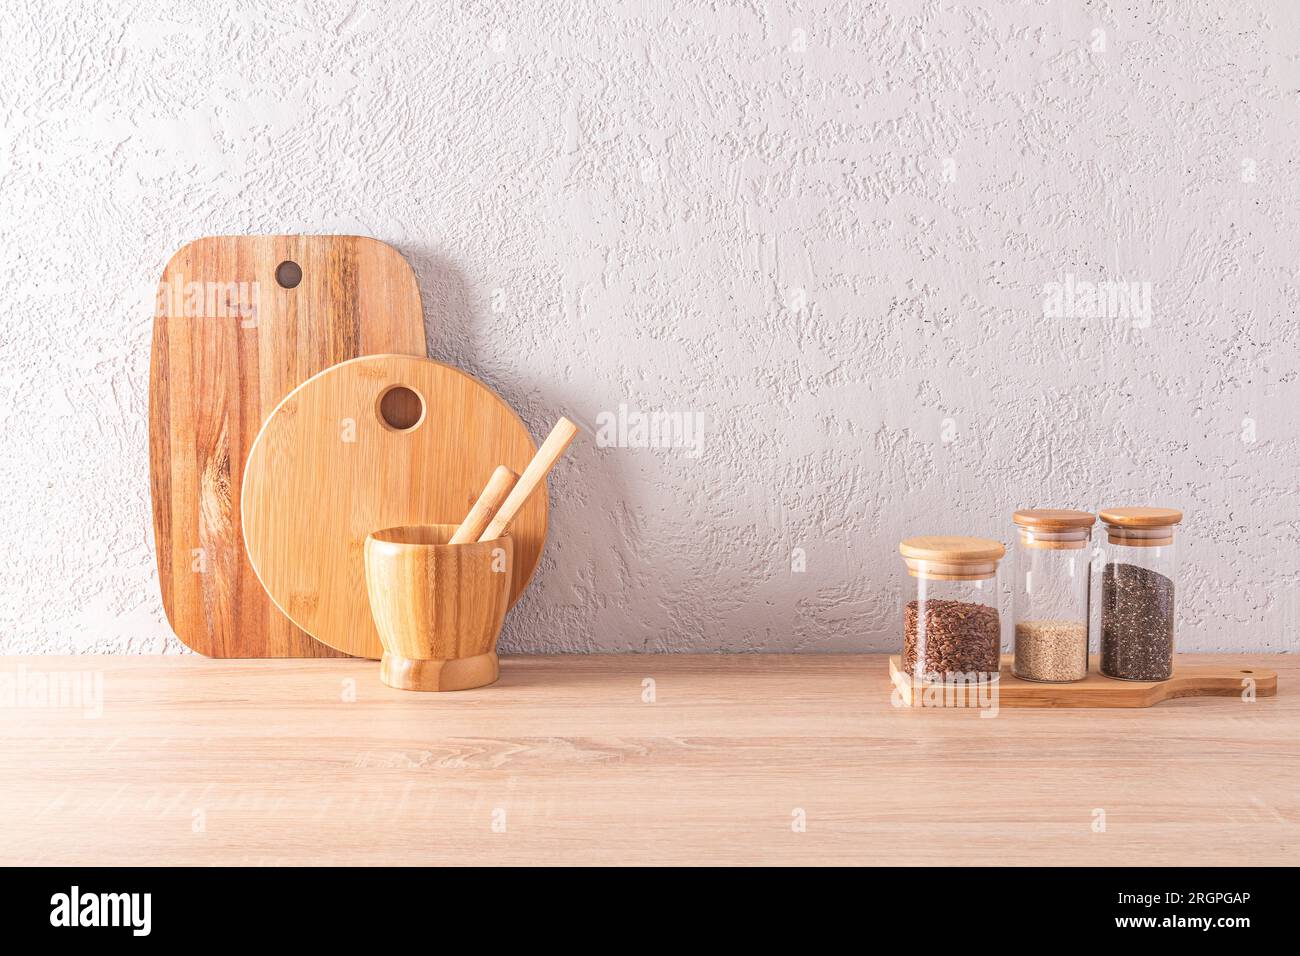 https://c8.alamy.com/comp/2RGPGAP/front-view-of-the-wooden-countertop-of-an-eco-friendly-kitchen-with-jars-for-storing-bulk-products-and-cutting-boards-space-for-text-2RGPGAP.jpg